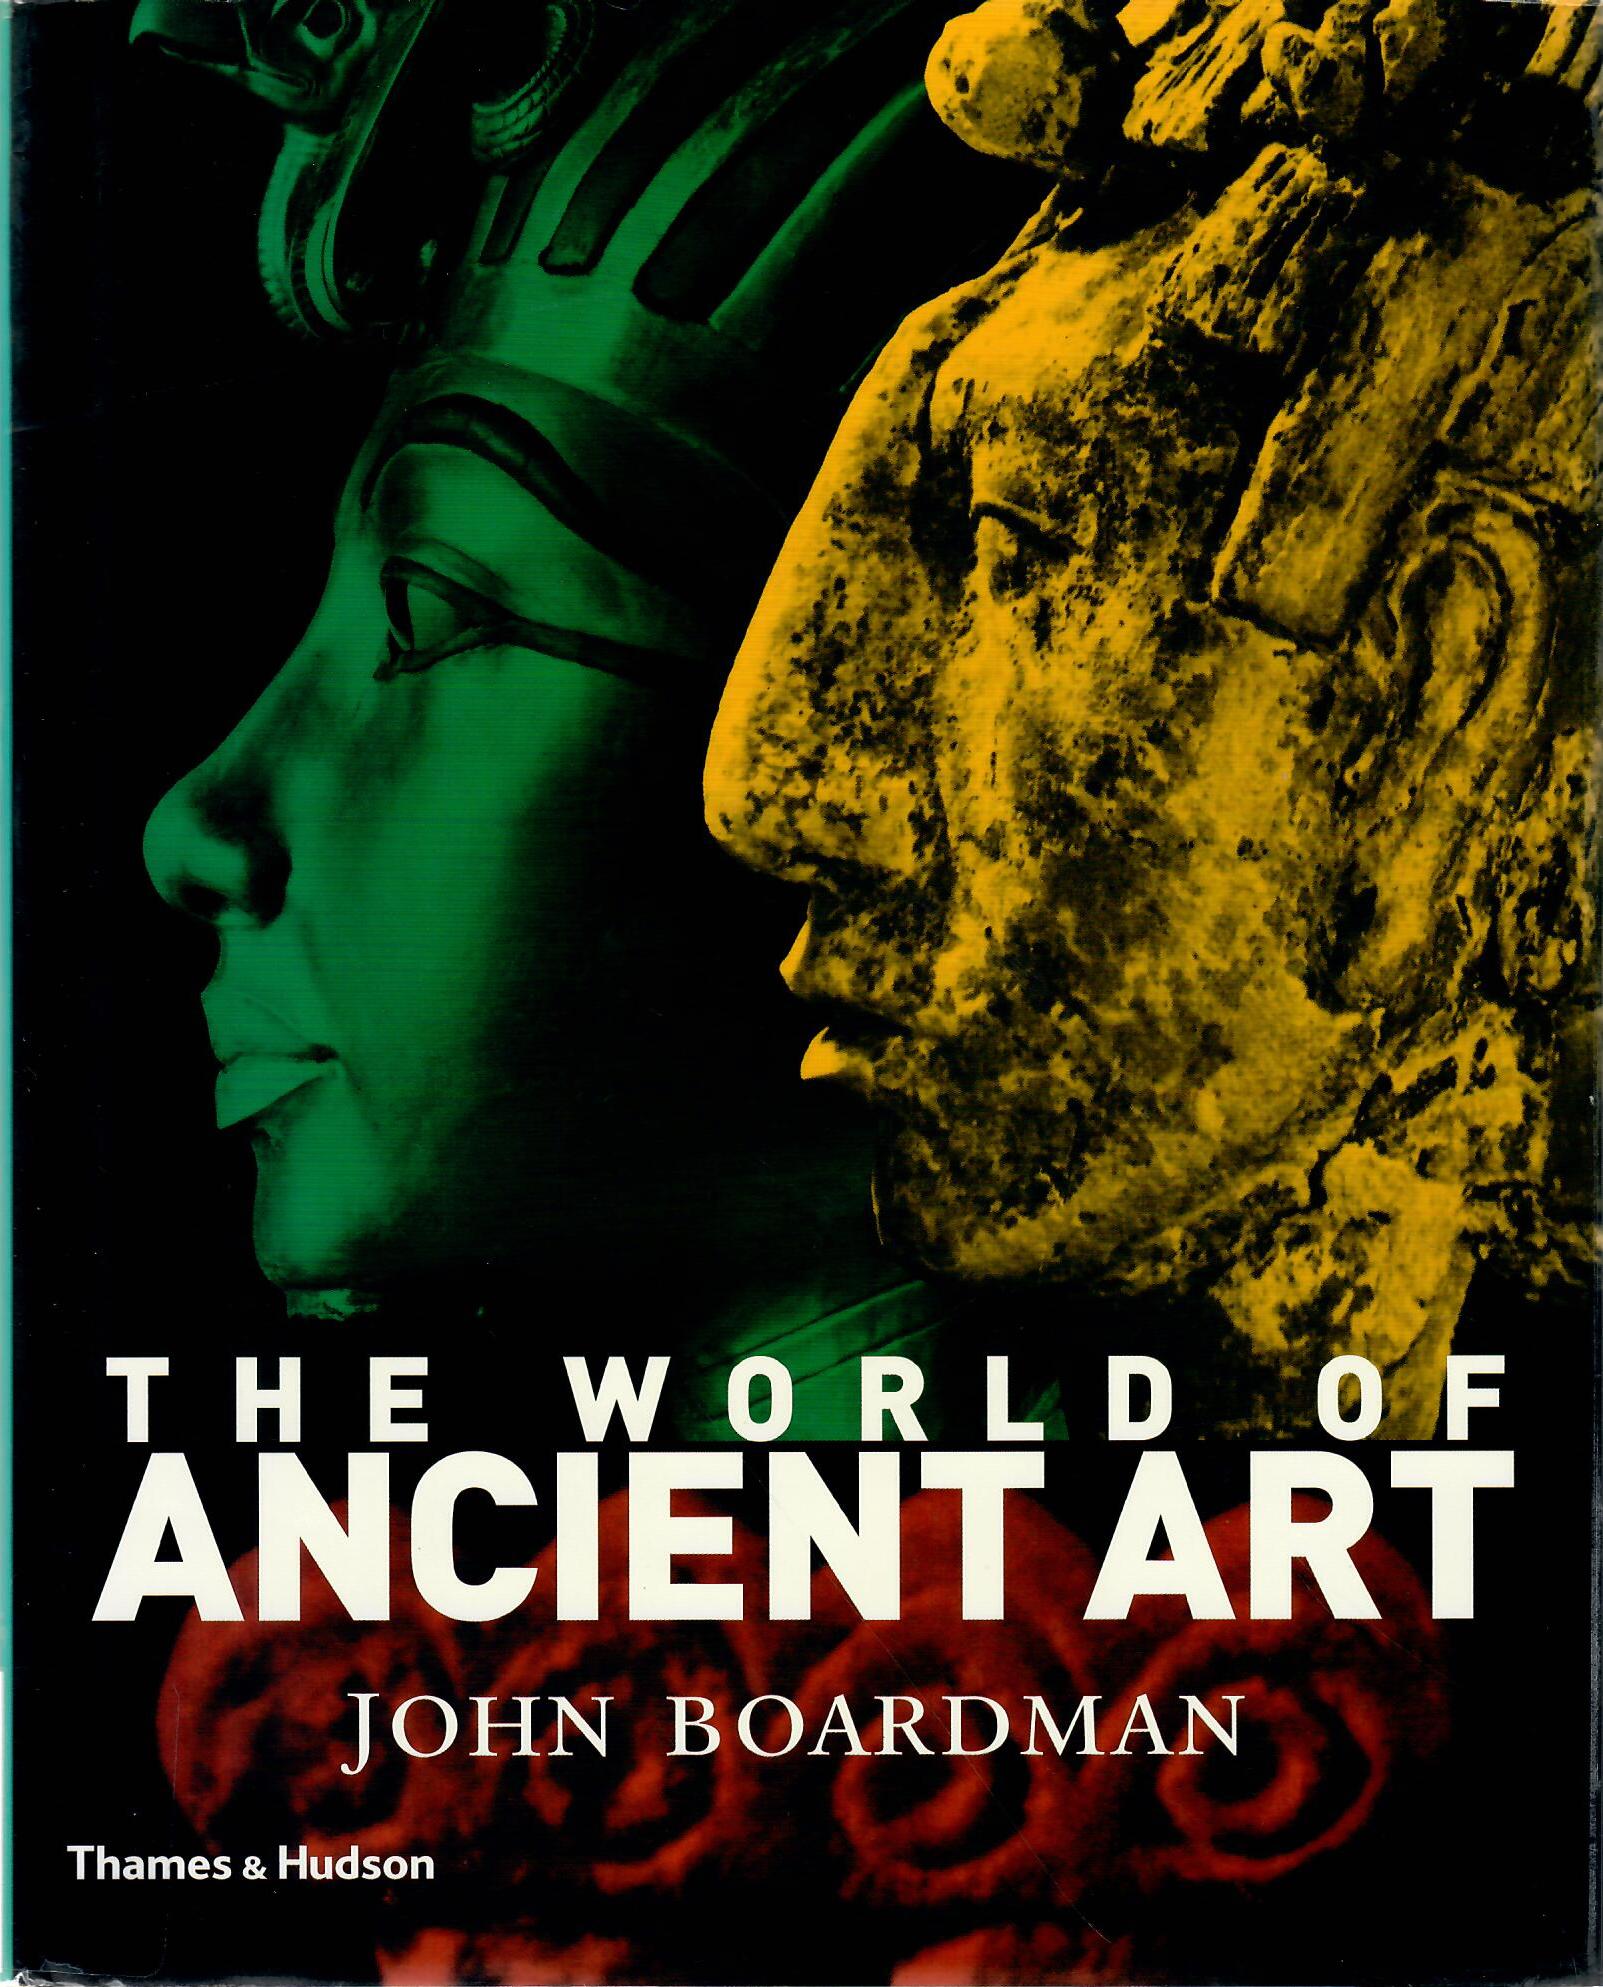 THE WORLD OF ANCIENT ART